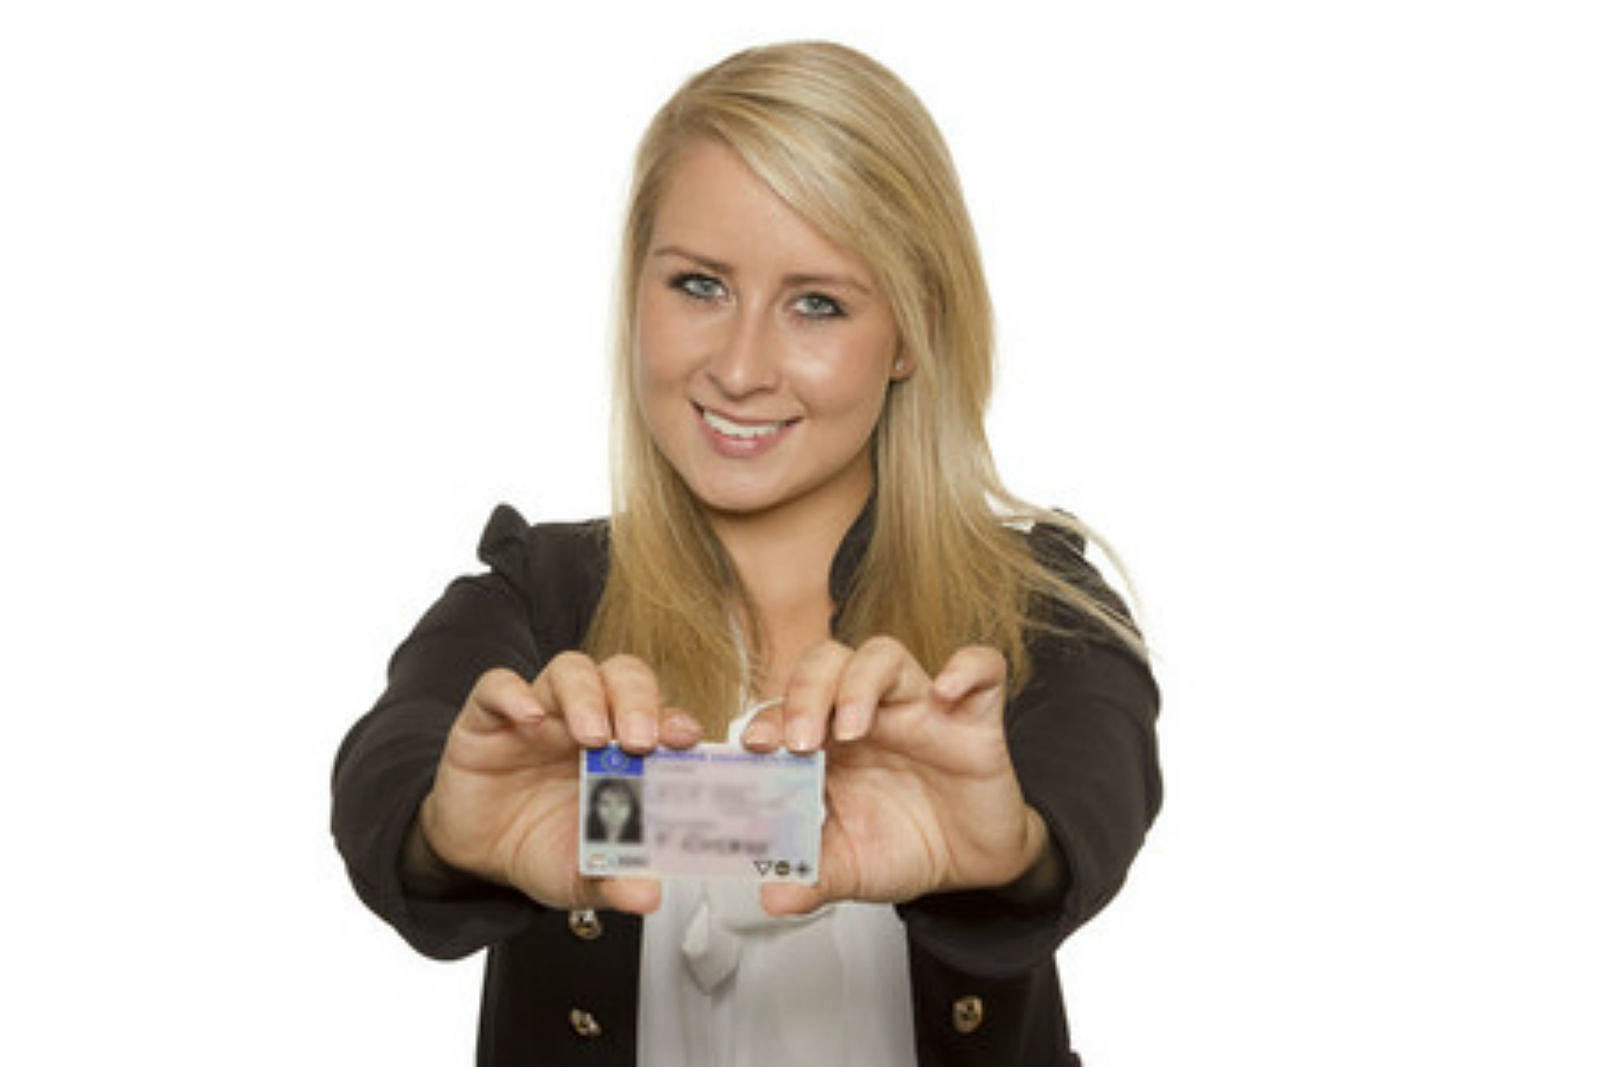 Illinois Scannable Fake Id Charges